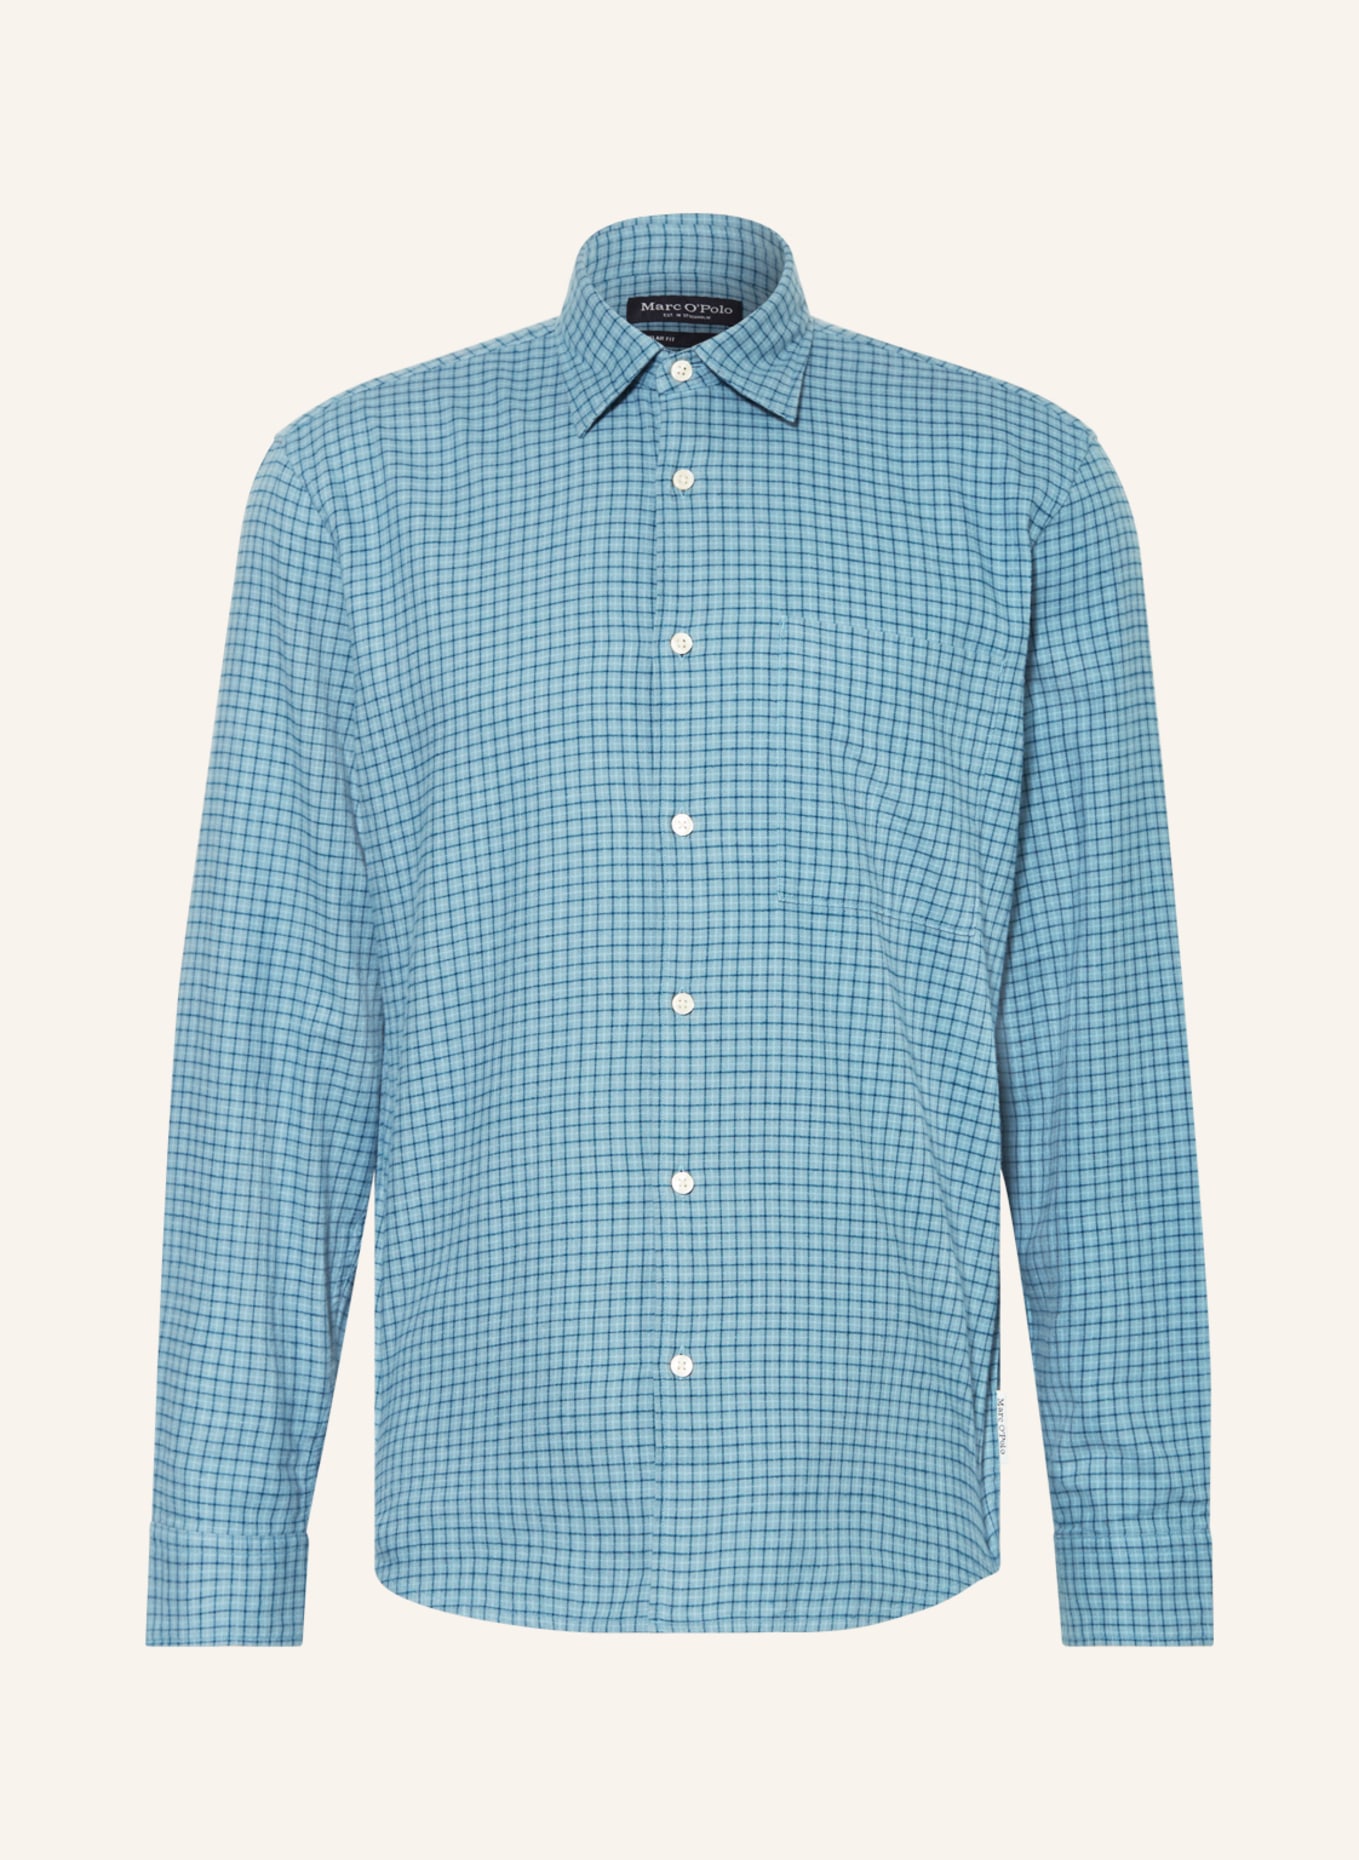 Marc O'Polo Flannel shirt regular fit, Color: MINT/ DARK GREEN (Image 1)